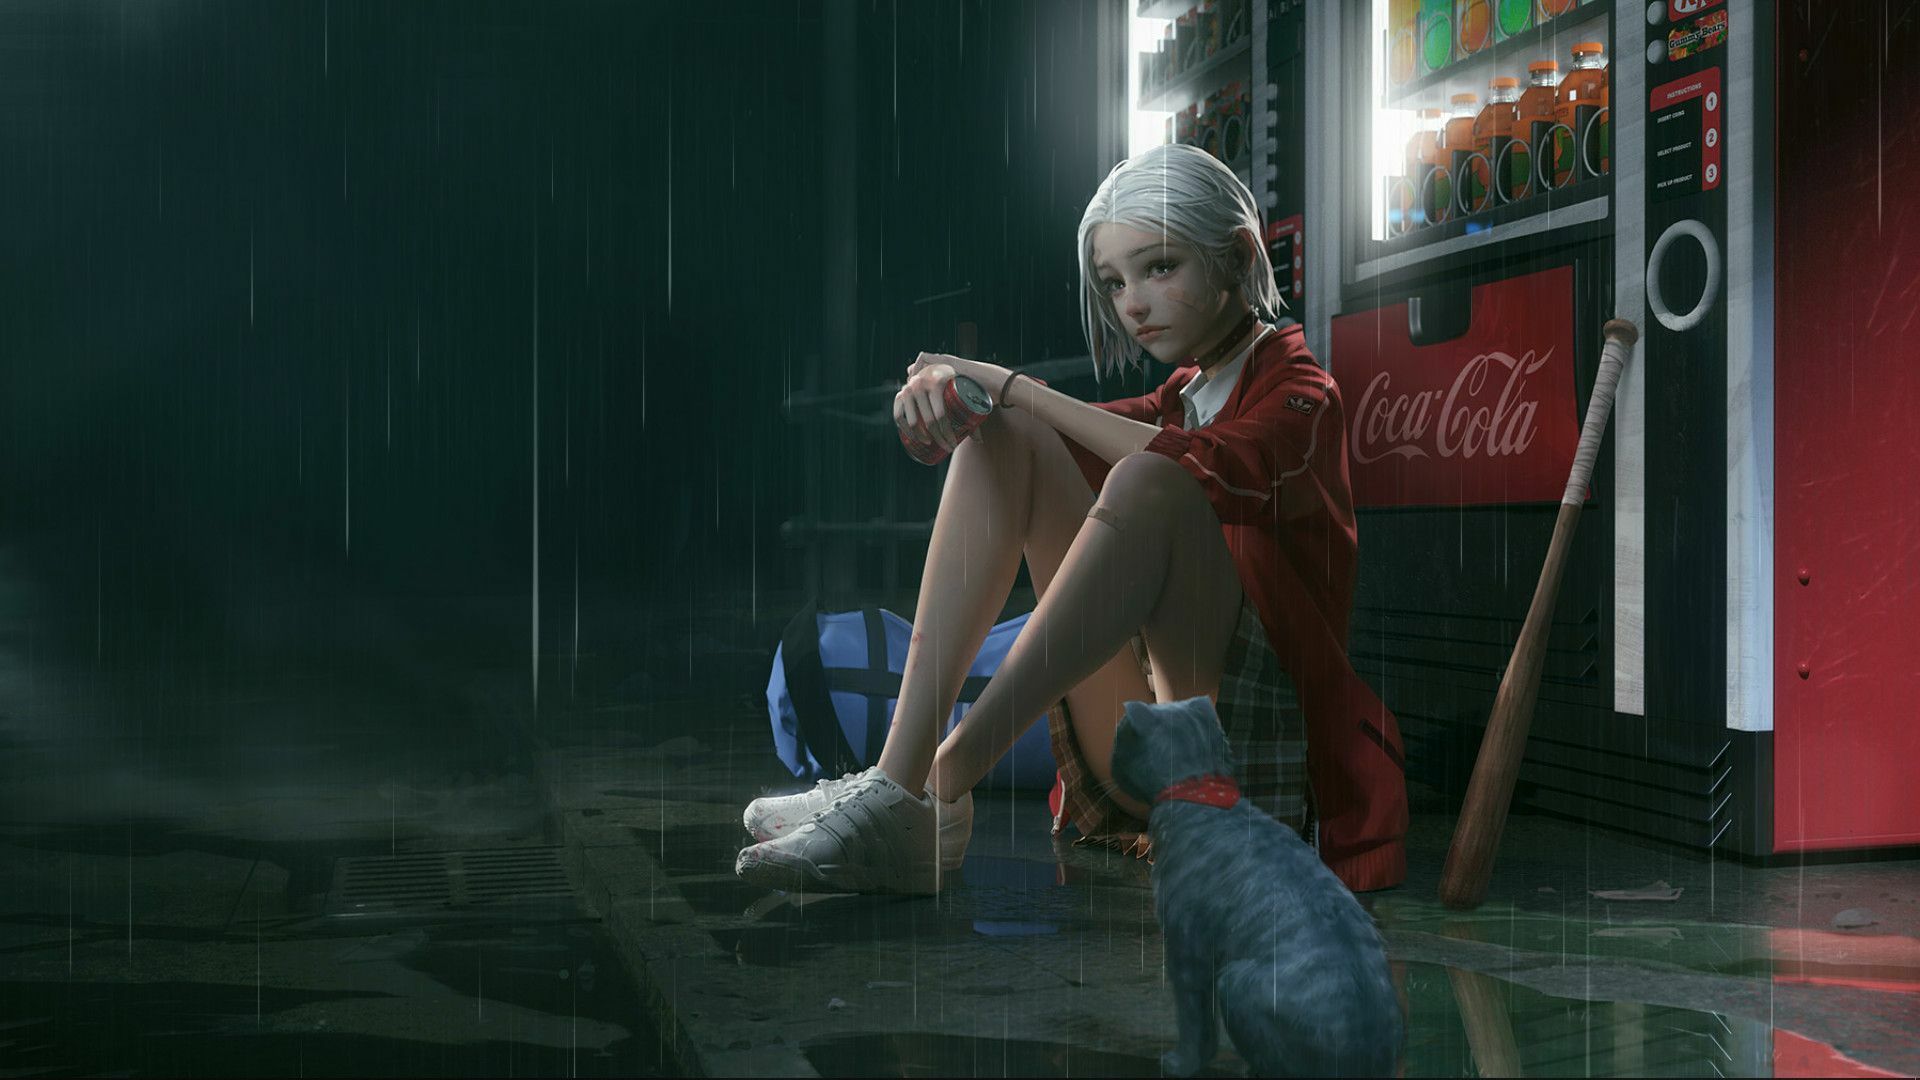 Girl near the vending machine with a Cola live wallpaper [DOWNLOAD FREE]